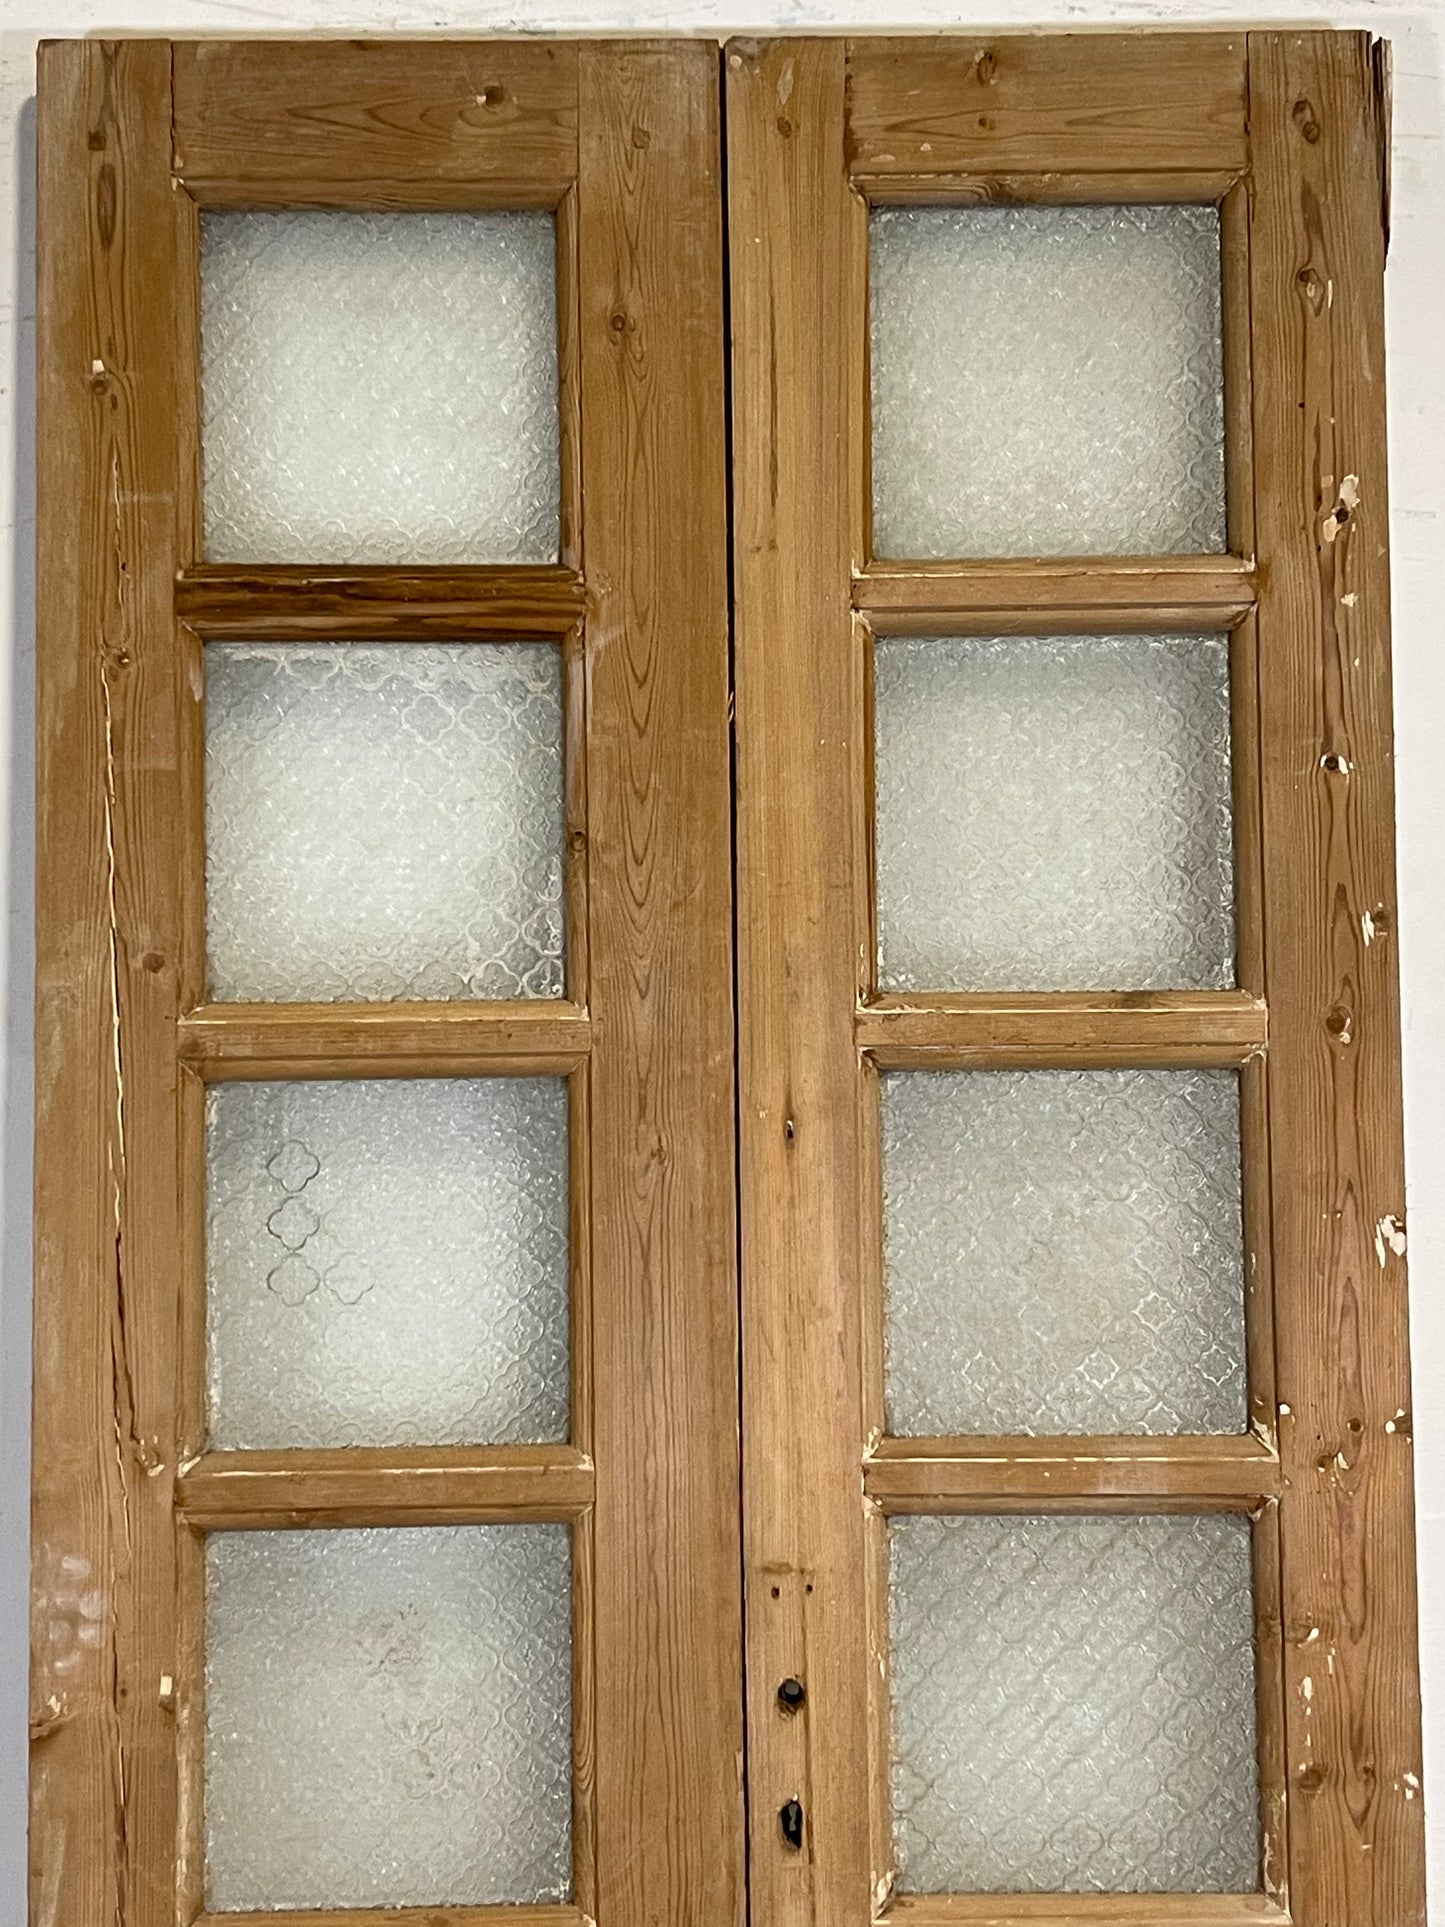 Antique French panel doors with glass (85.5x33.25) K331